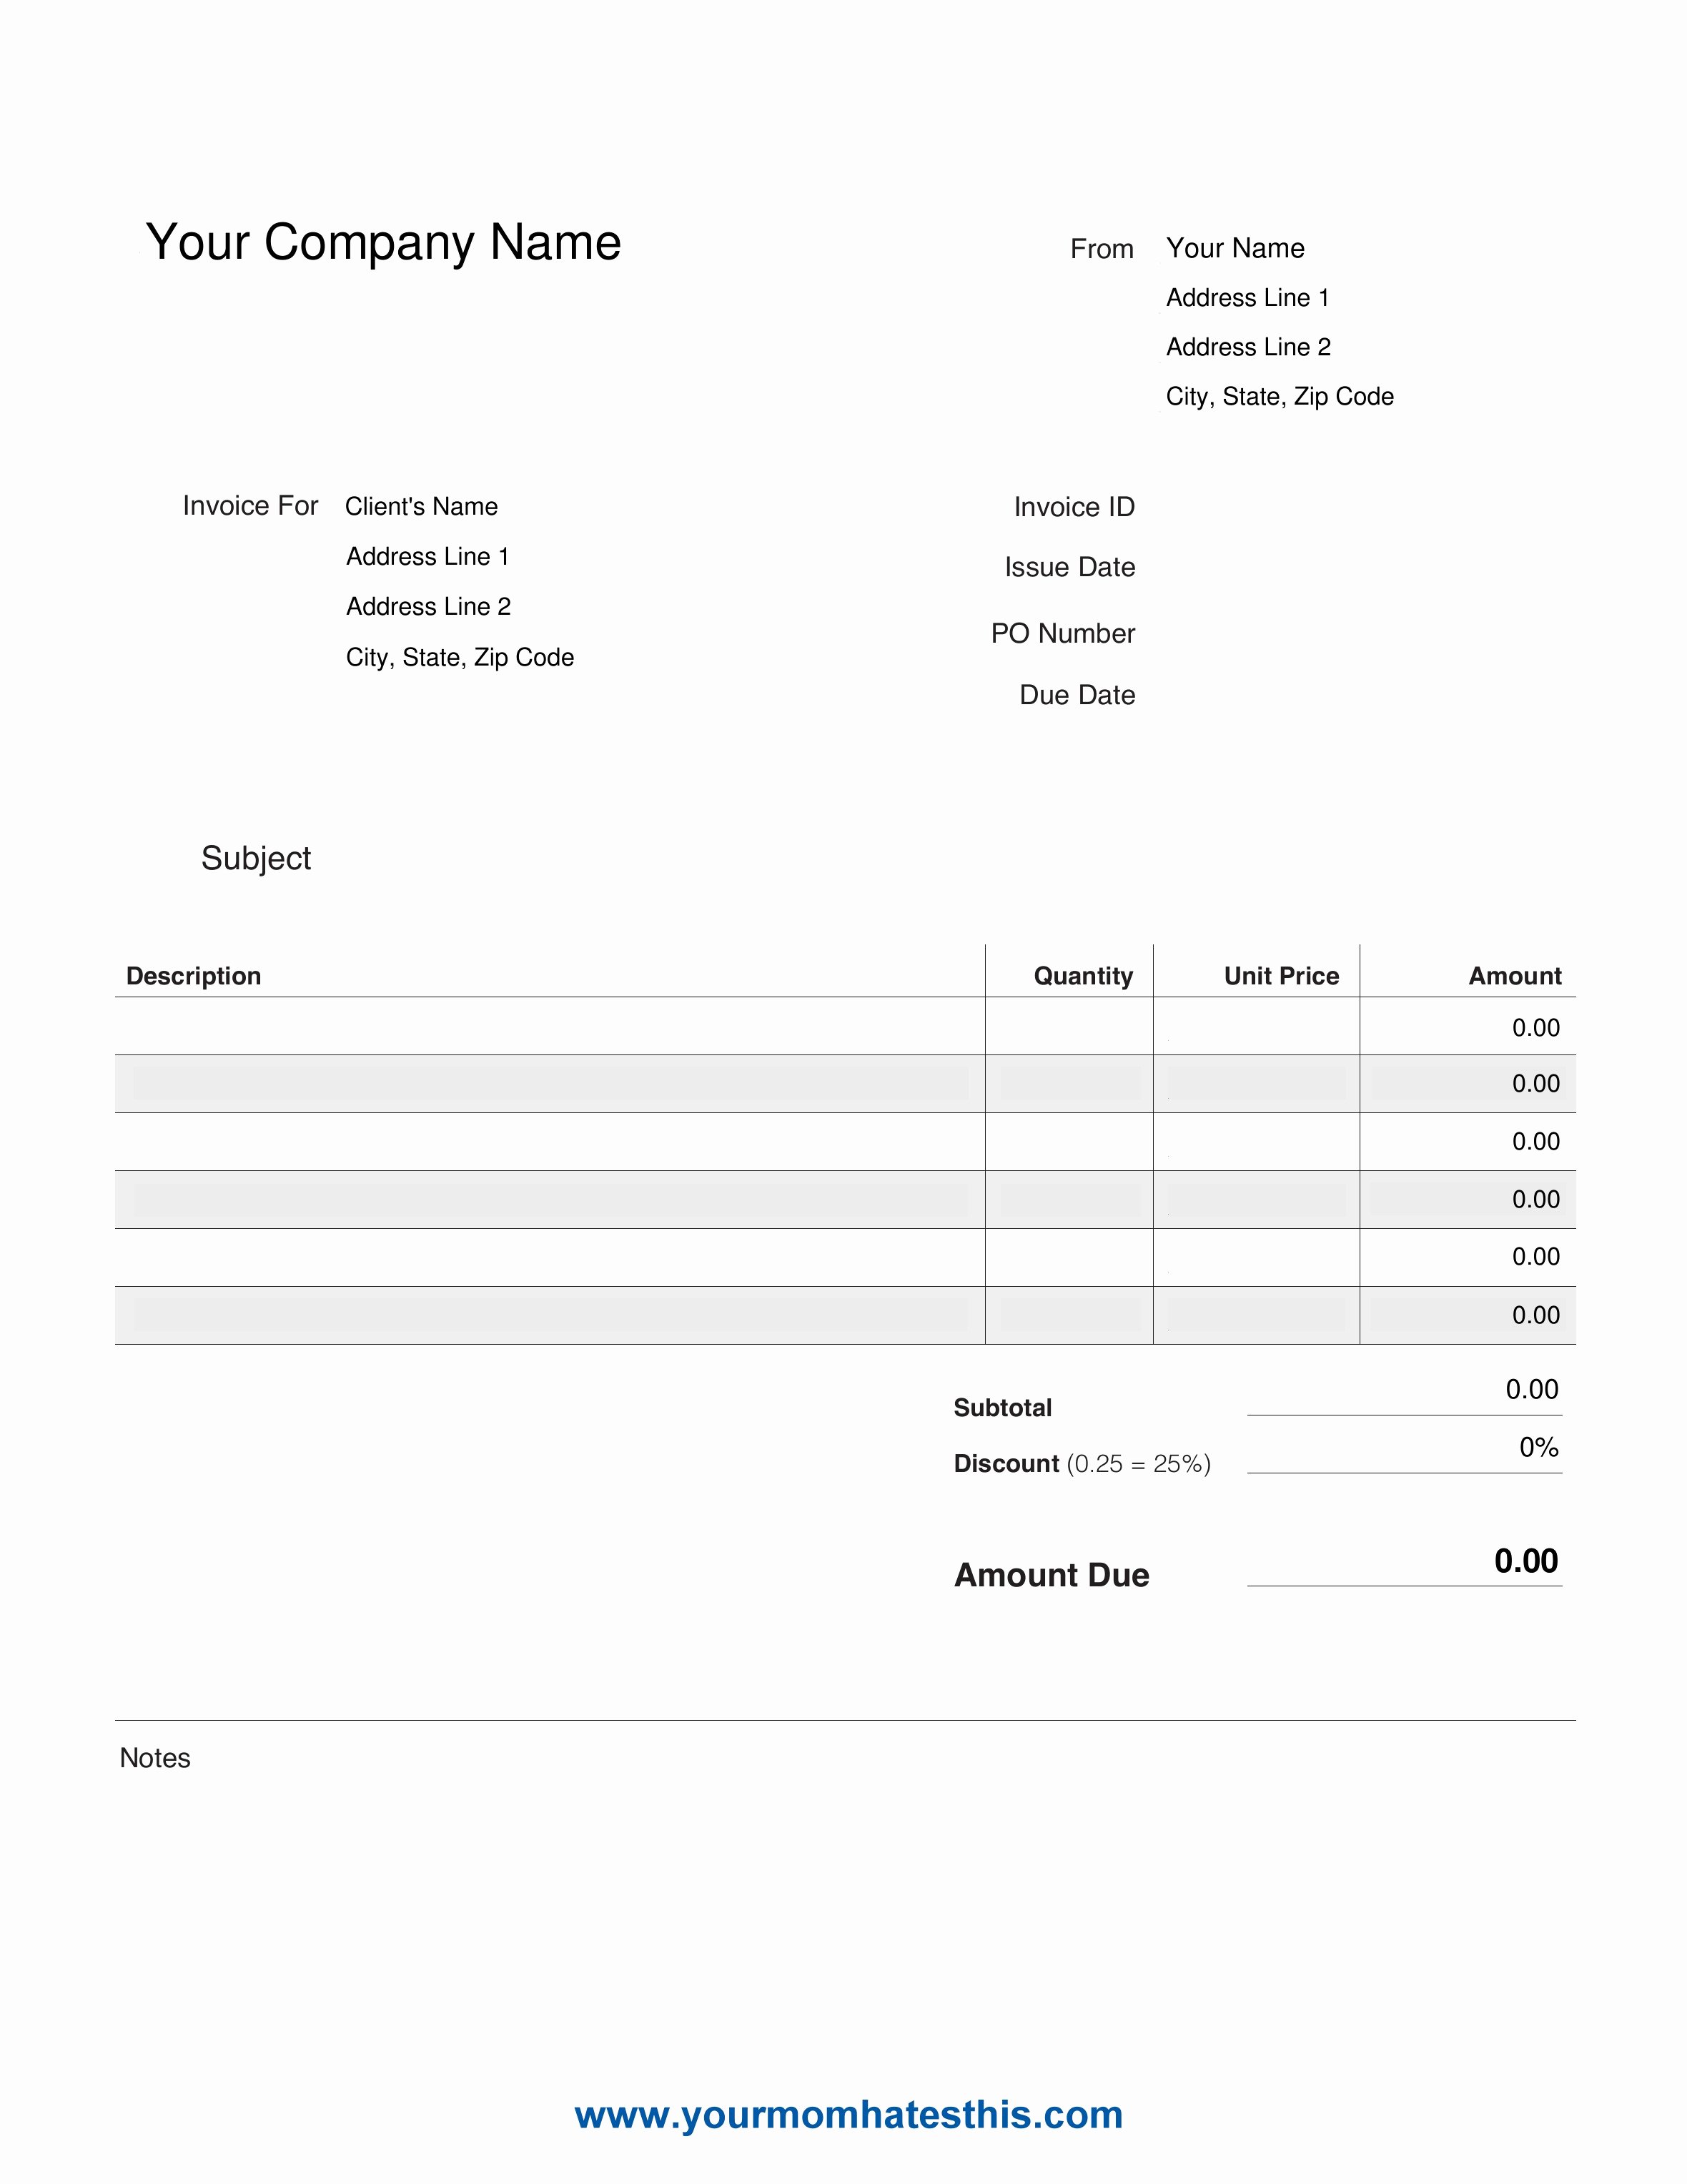 Free Business Invoice Template Awesome E Must Know On Business Invoice Templates